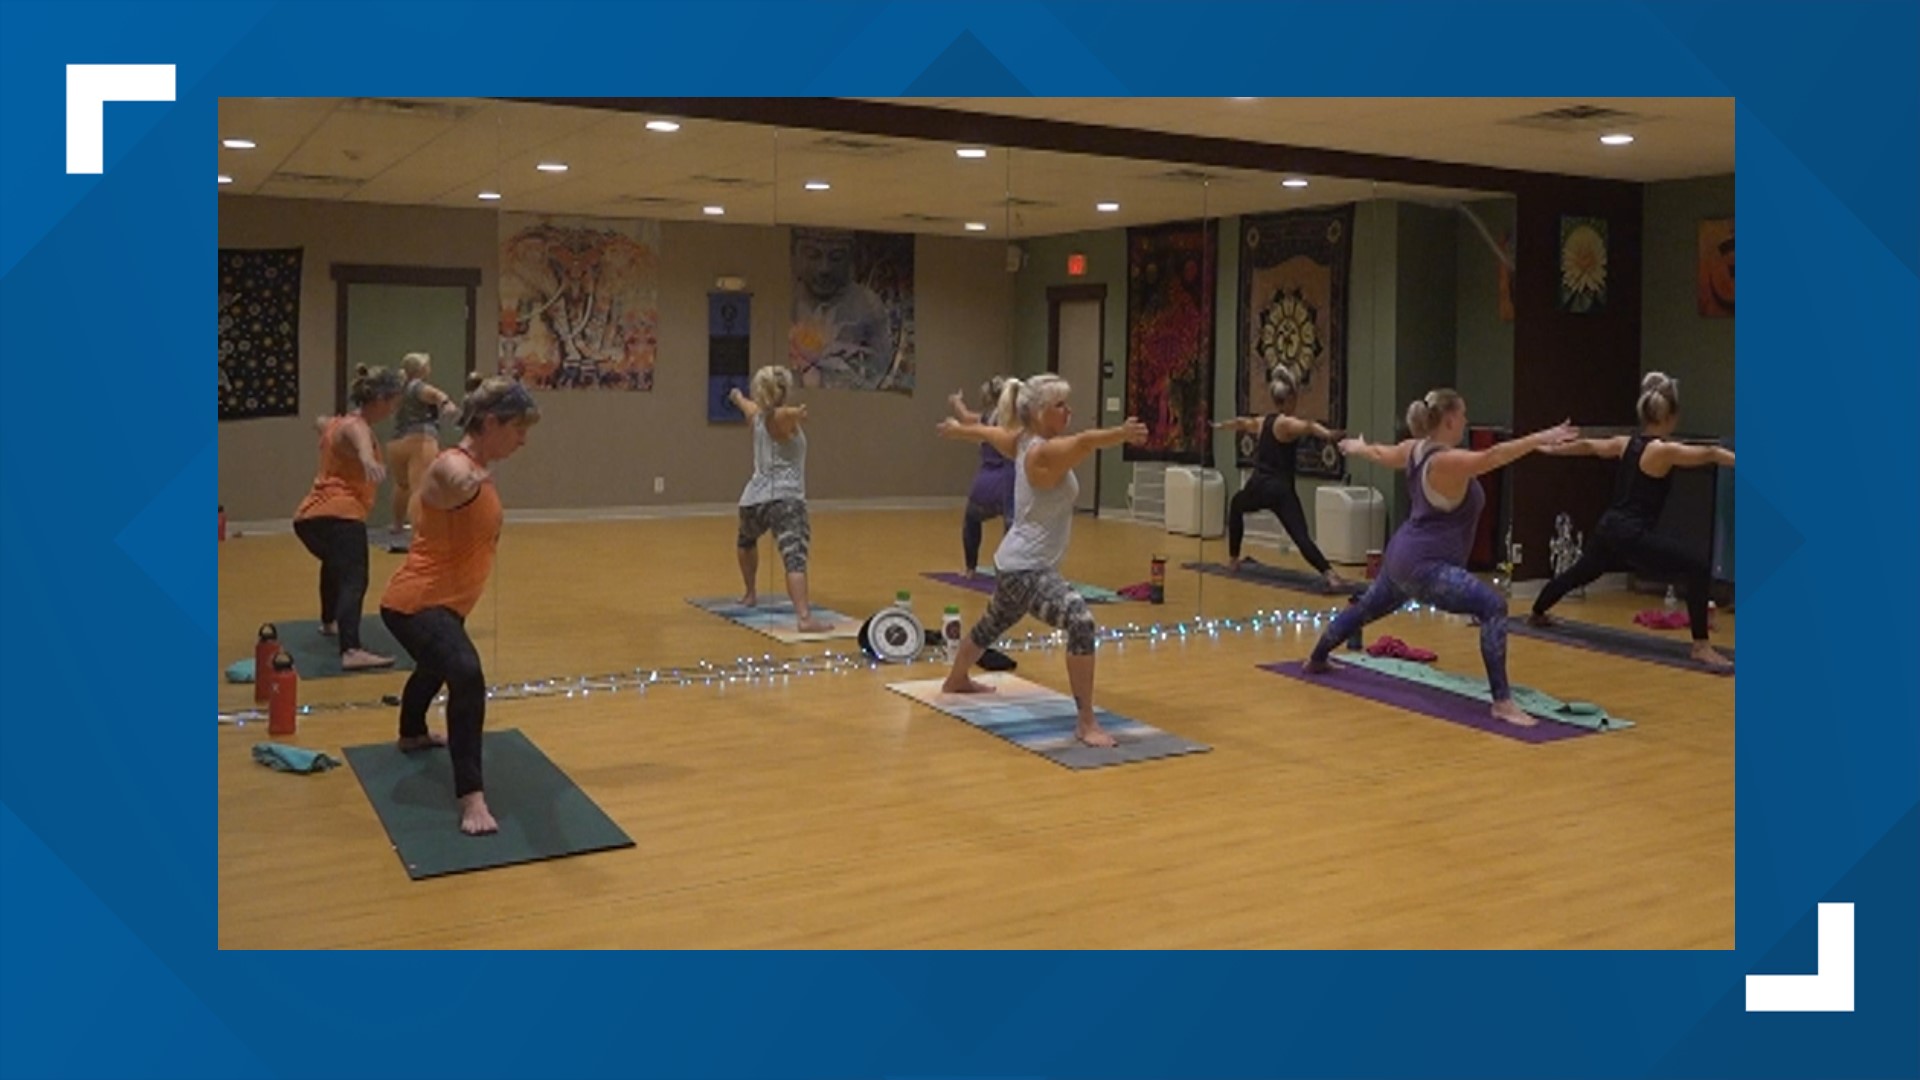 Time to get your stretch and sweat on in this week's unique fitness class! FOX43's Ally Debicki takes you to Twisted Roots Yoga in York County to try Bikram yoga.